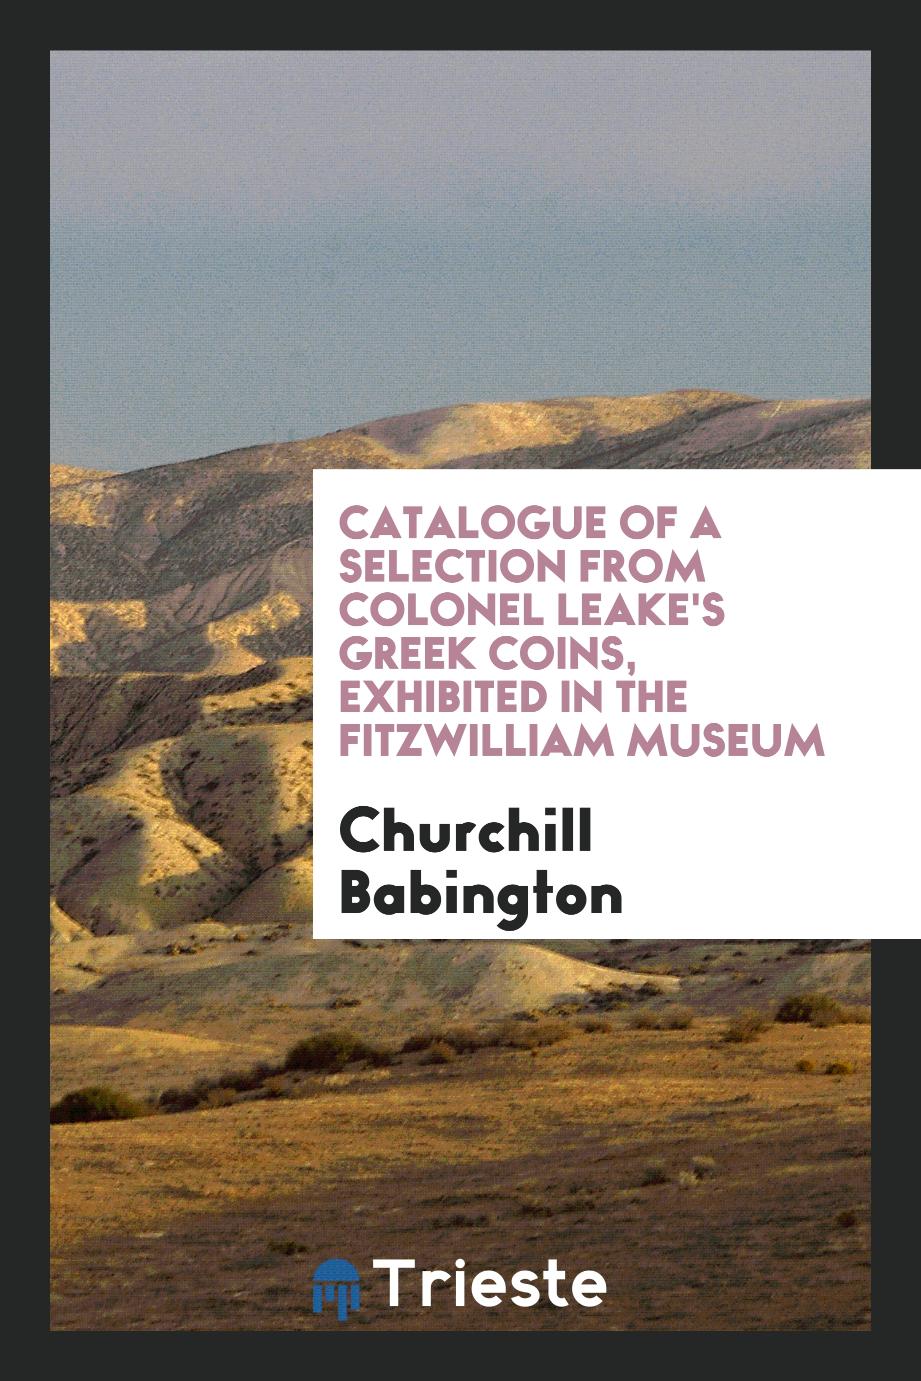 Catalogue of a Selection from Colonel Leake's Greek Coins, Exhibited in the Fitzwilliam Museum